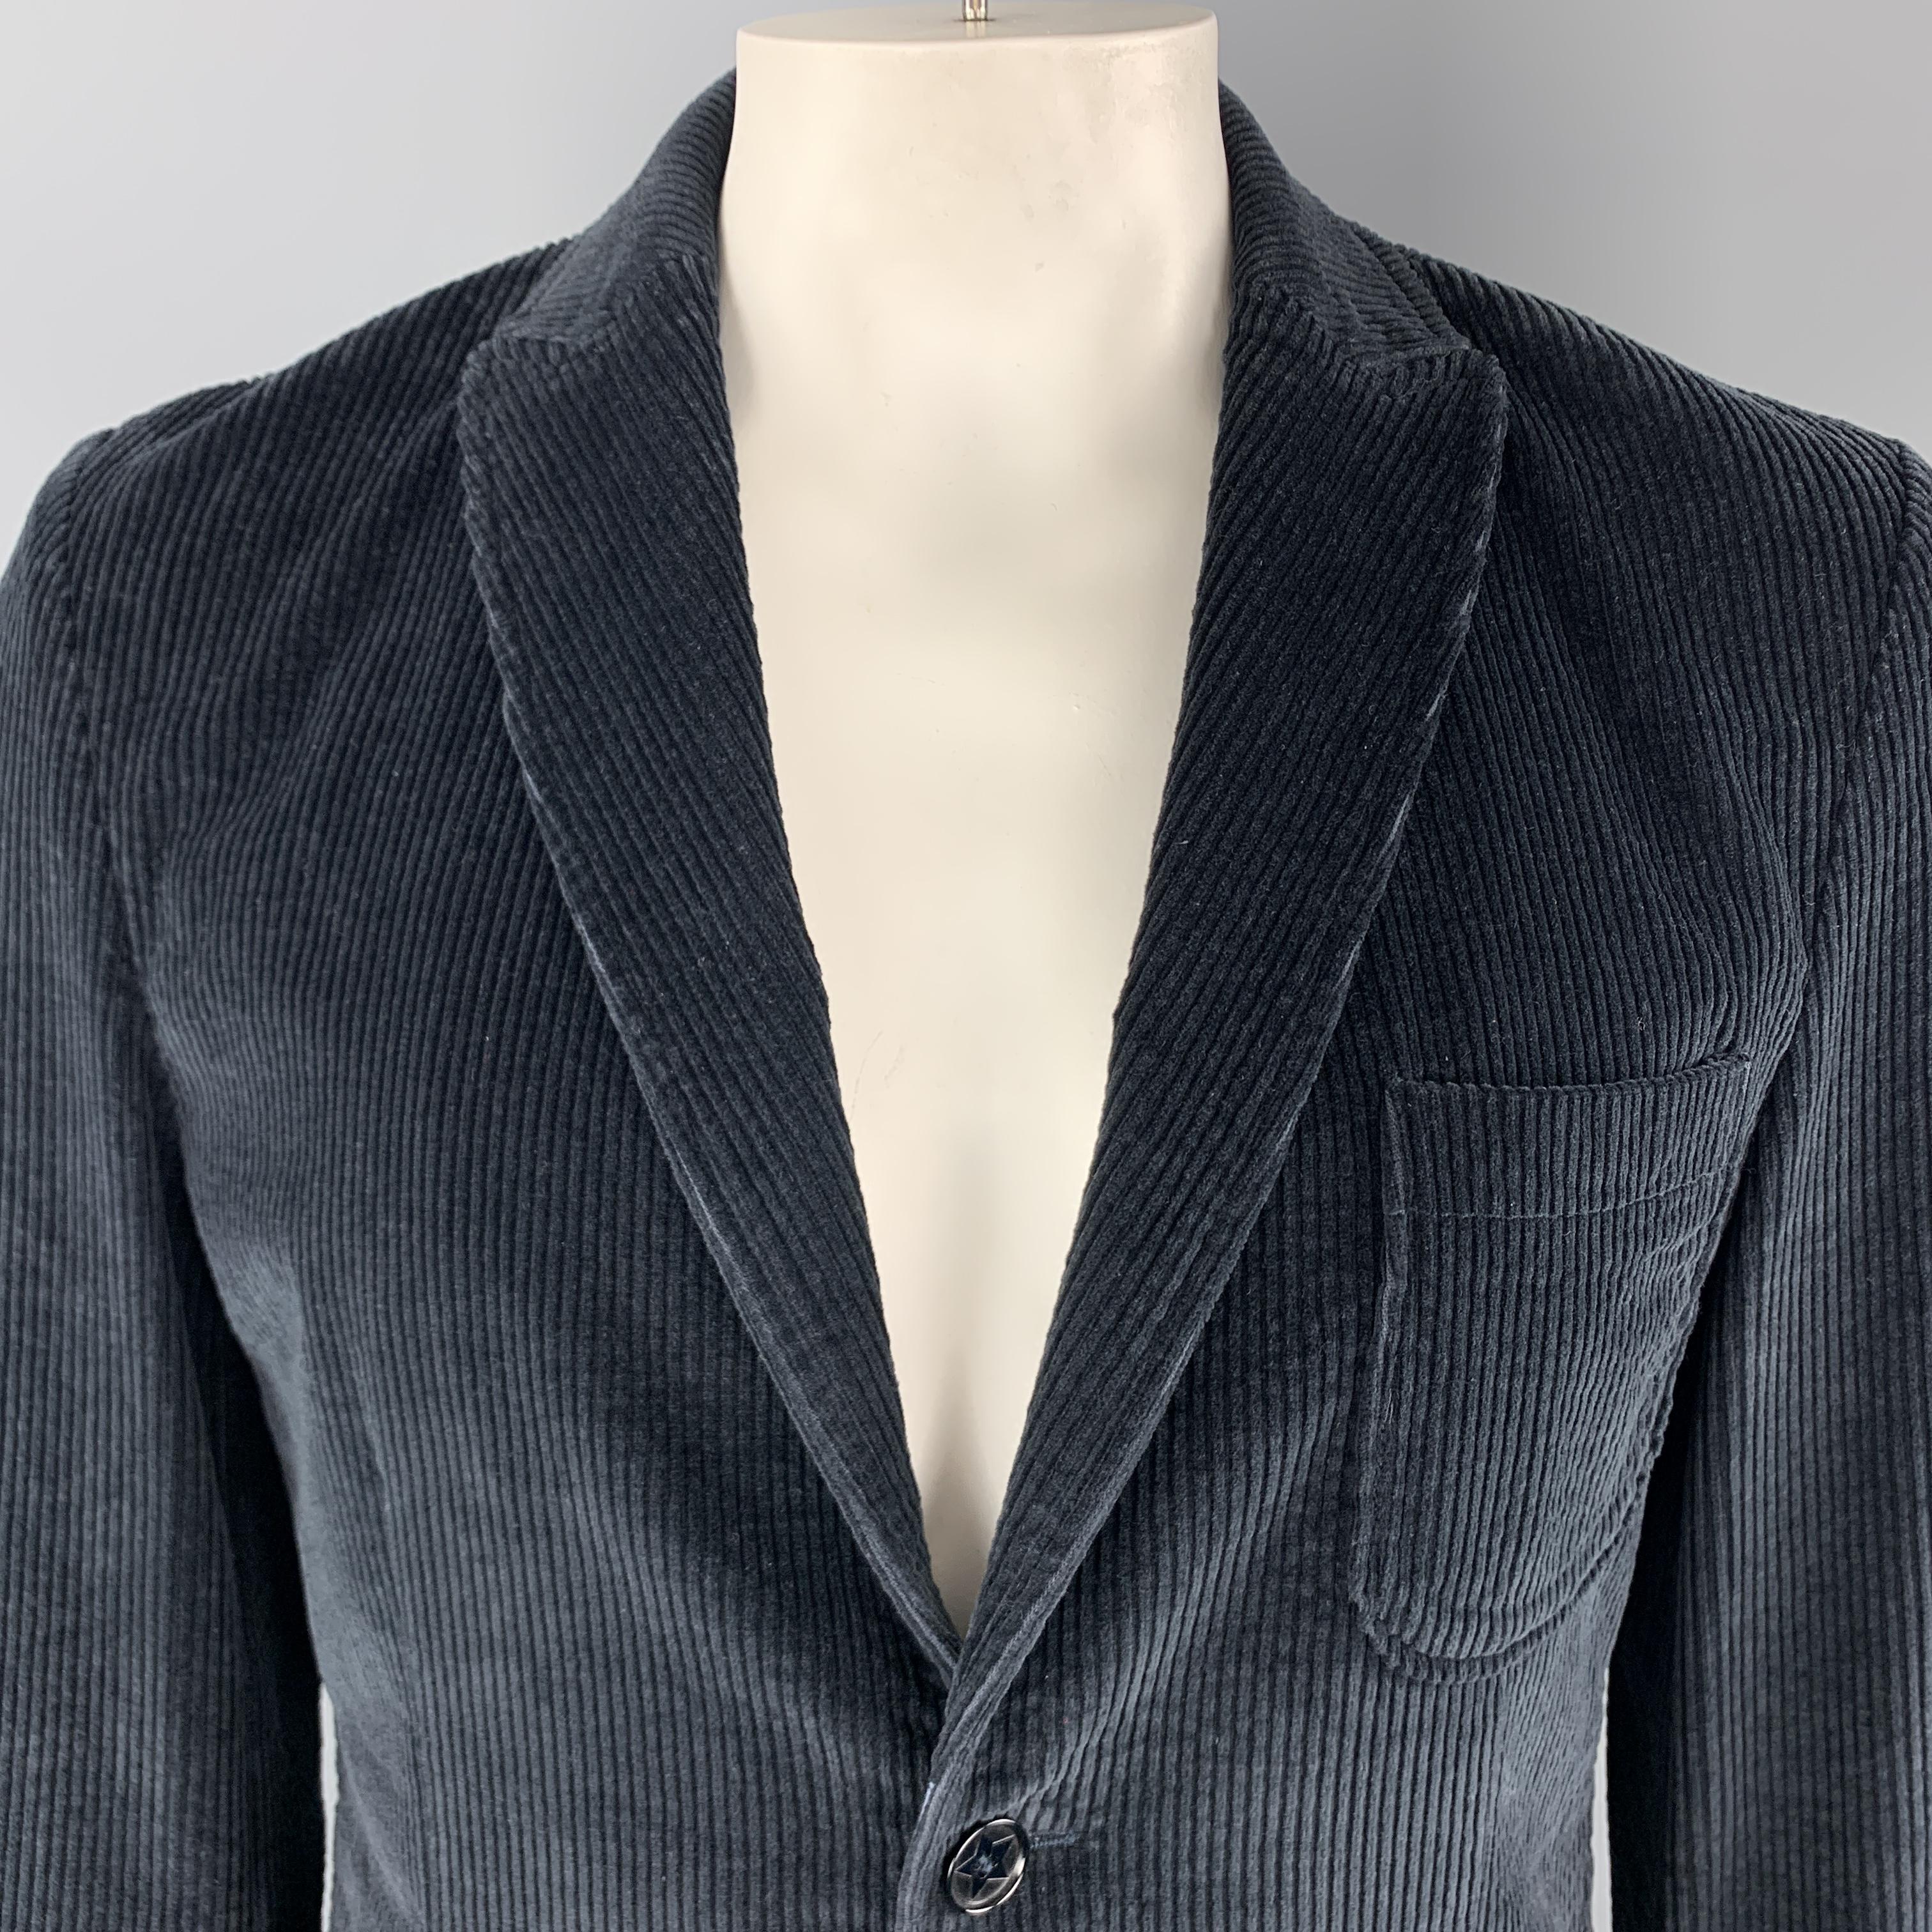 DANIELE ALESSANDRINI Sport Coat comes in a navy corduroy material, with a peak lapel, patch and slit pockets, two buttons at closure, single breasted, unbuttoned cuffs and a single vent at back. Made in Italy. 

Excellent Pre-Owned